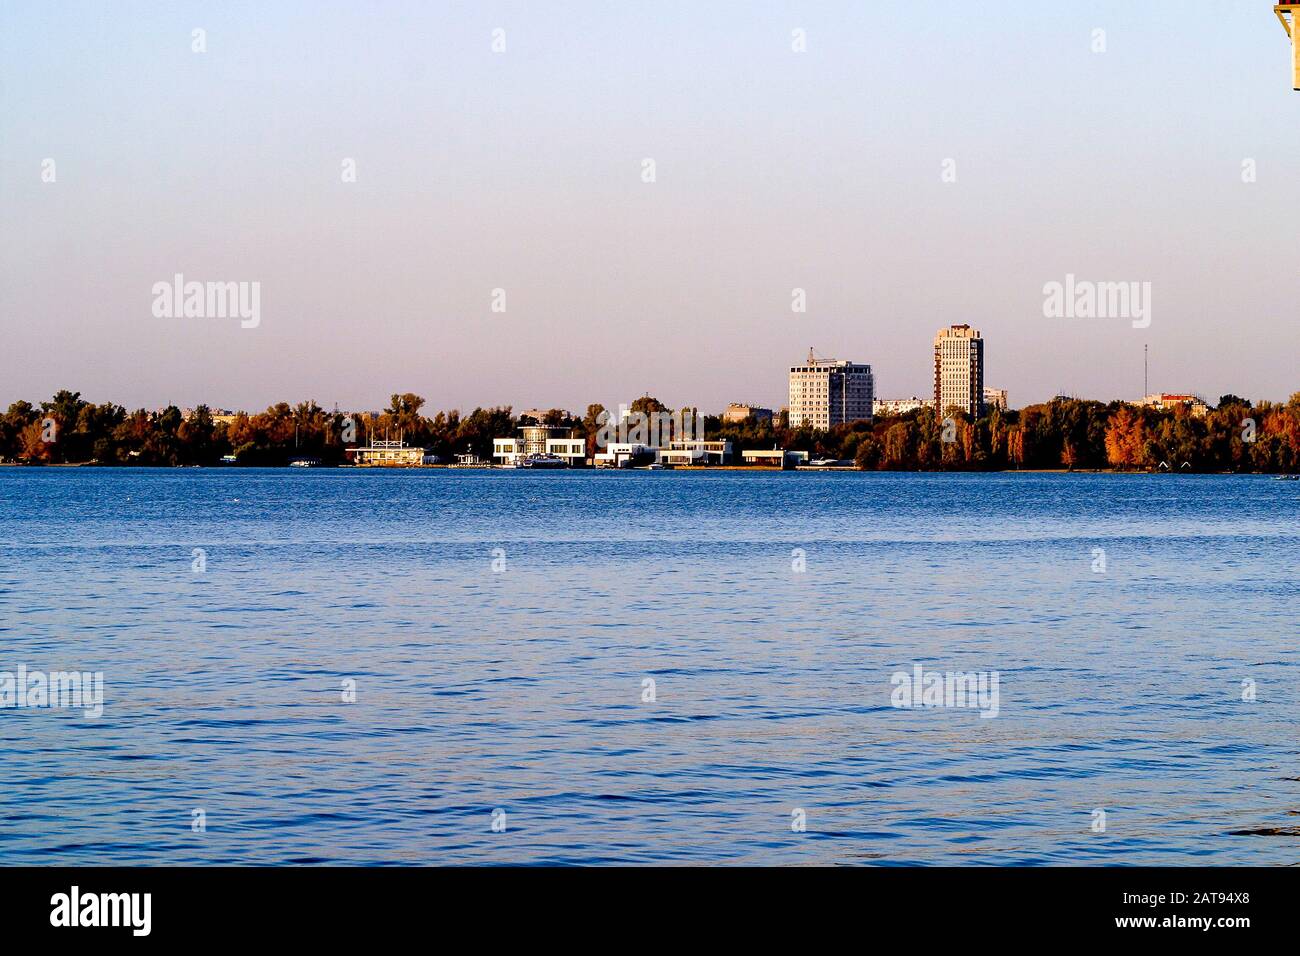 Left side of Dnipro city, Ukraine. Panoramic view of Dnipro river. Cityscape Housing estate Sunny with buildings. Stock Photo